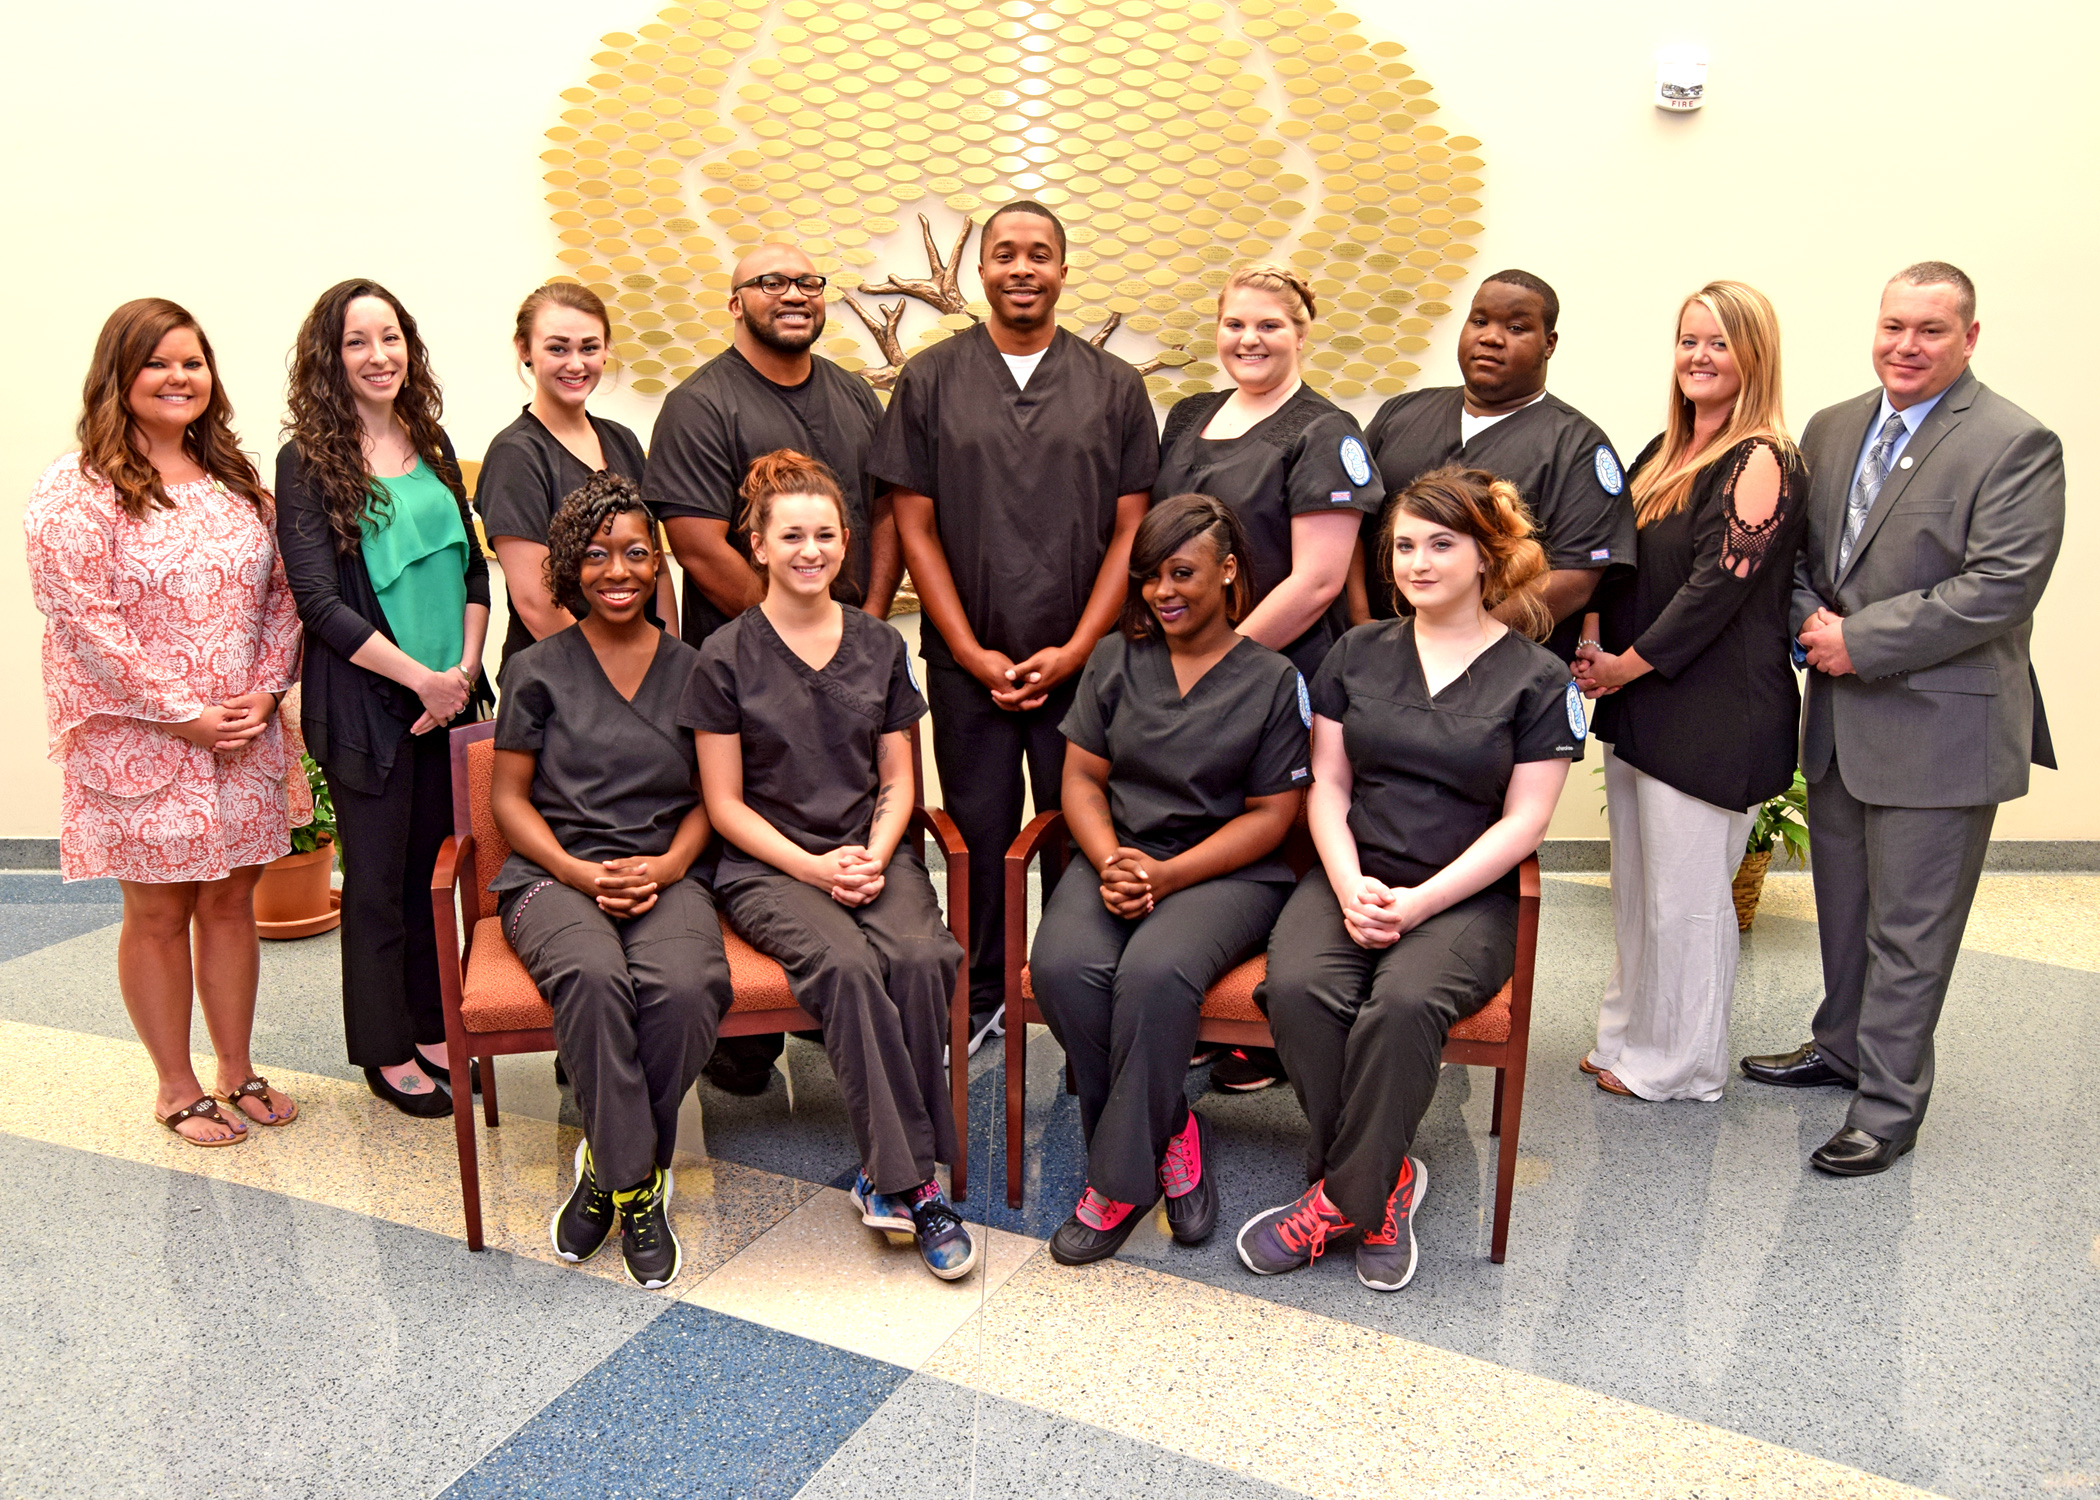 Associate Degree of Nursing Group Shot|CCTC’s Diploma in Applied Science with a major in Medical Assisting